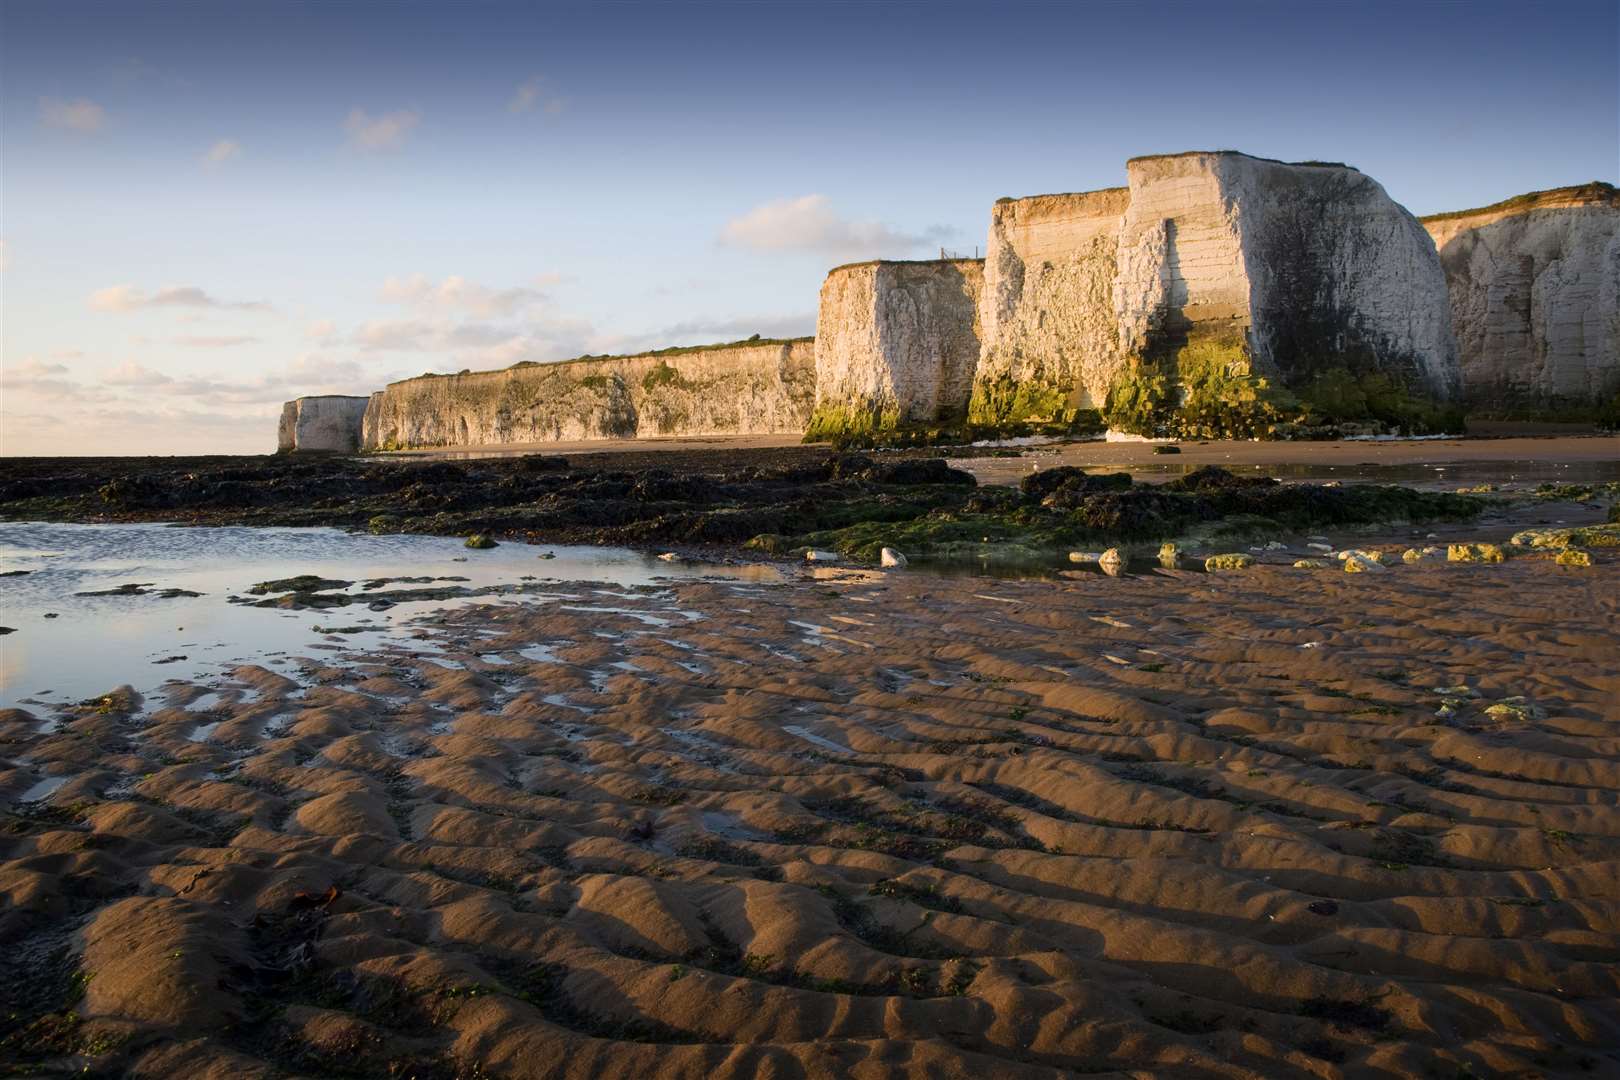 Kent has a host of attractions from castles to dramatic coastline